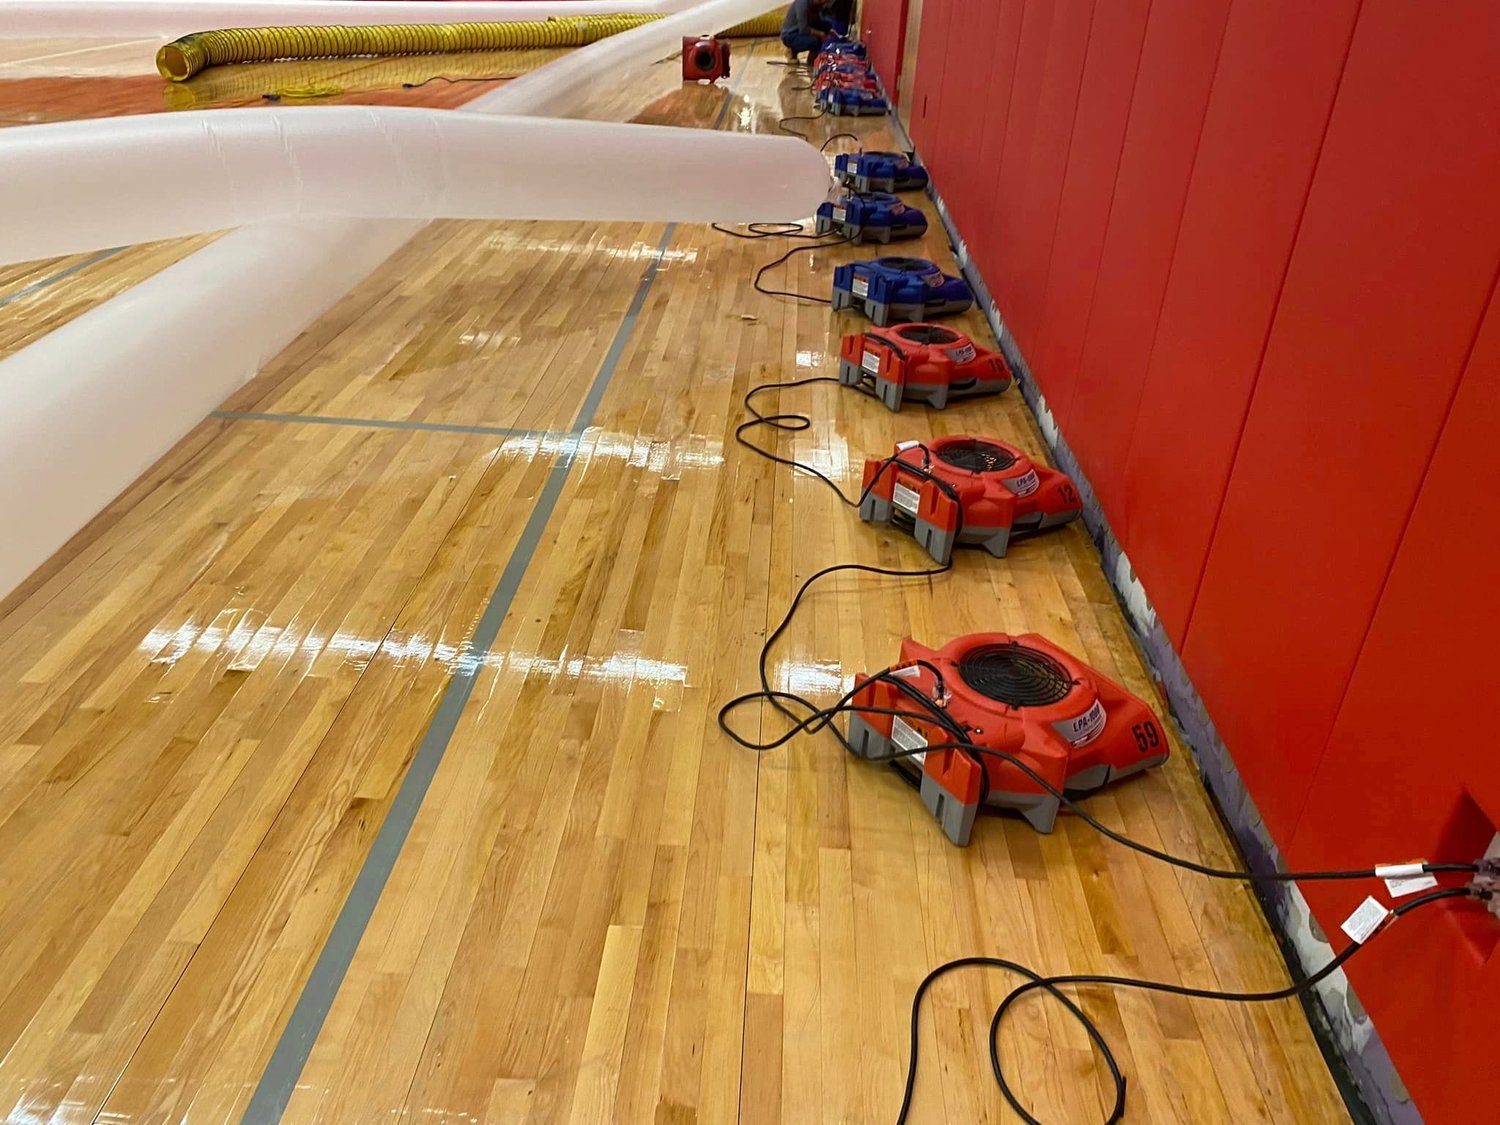 A view of the some of the fans used by Clean Care New England to assist in draw out water inside the EPHS gym following the accidental sprinkler discharge.